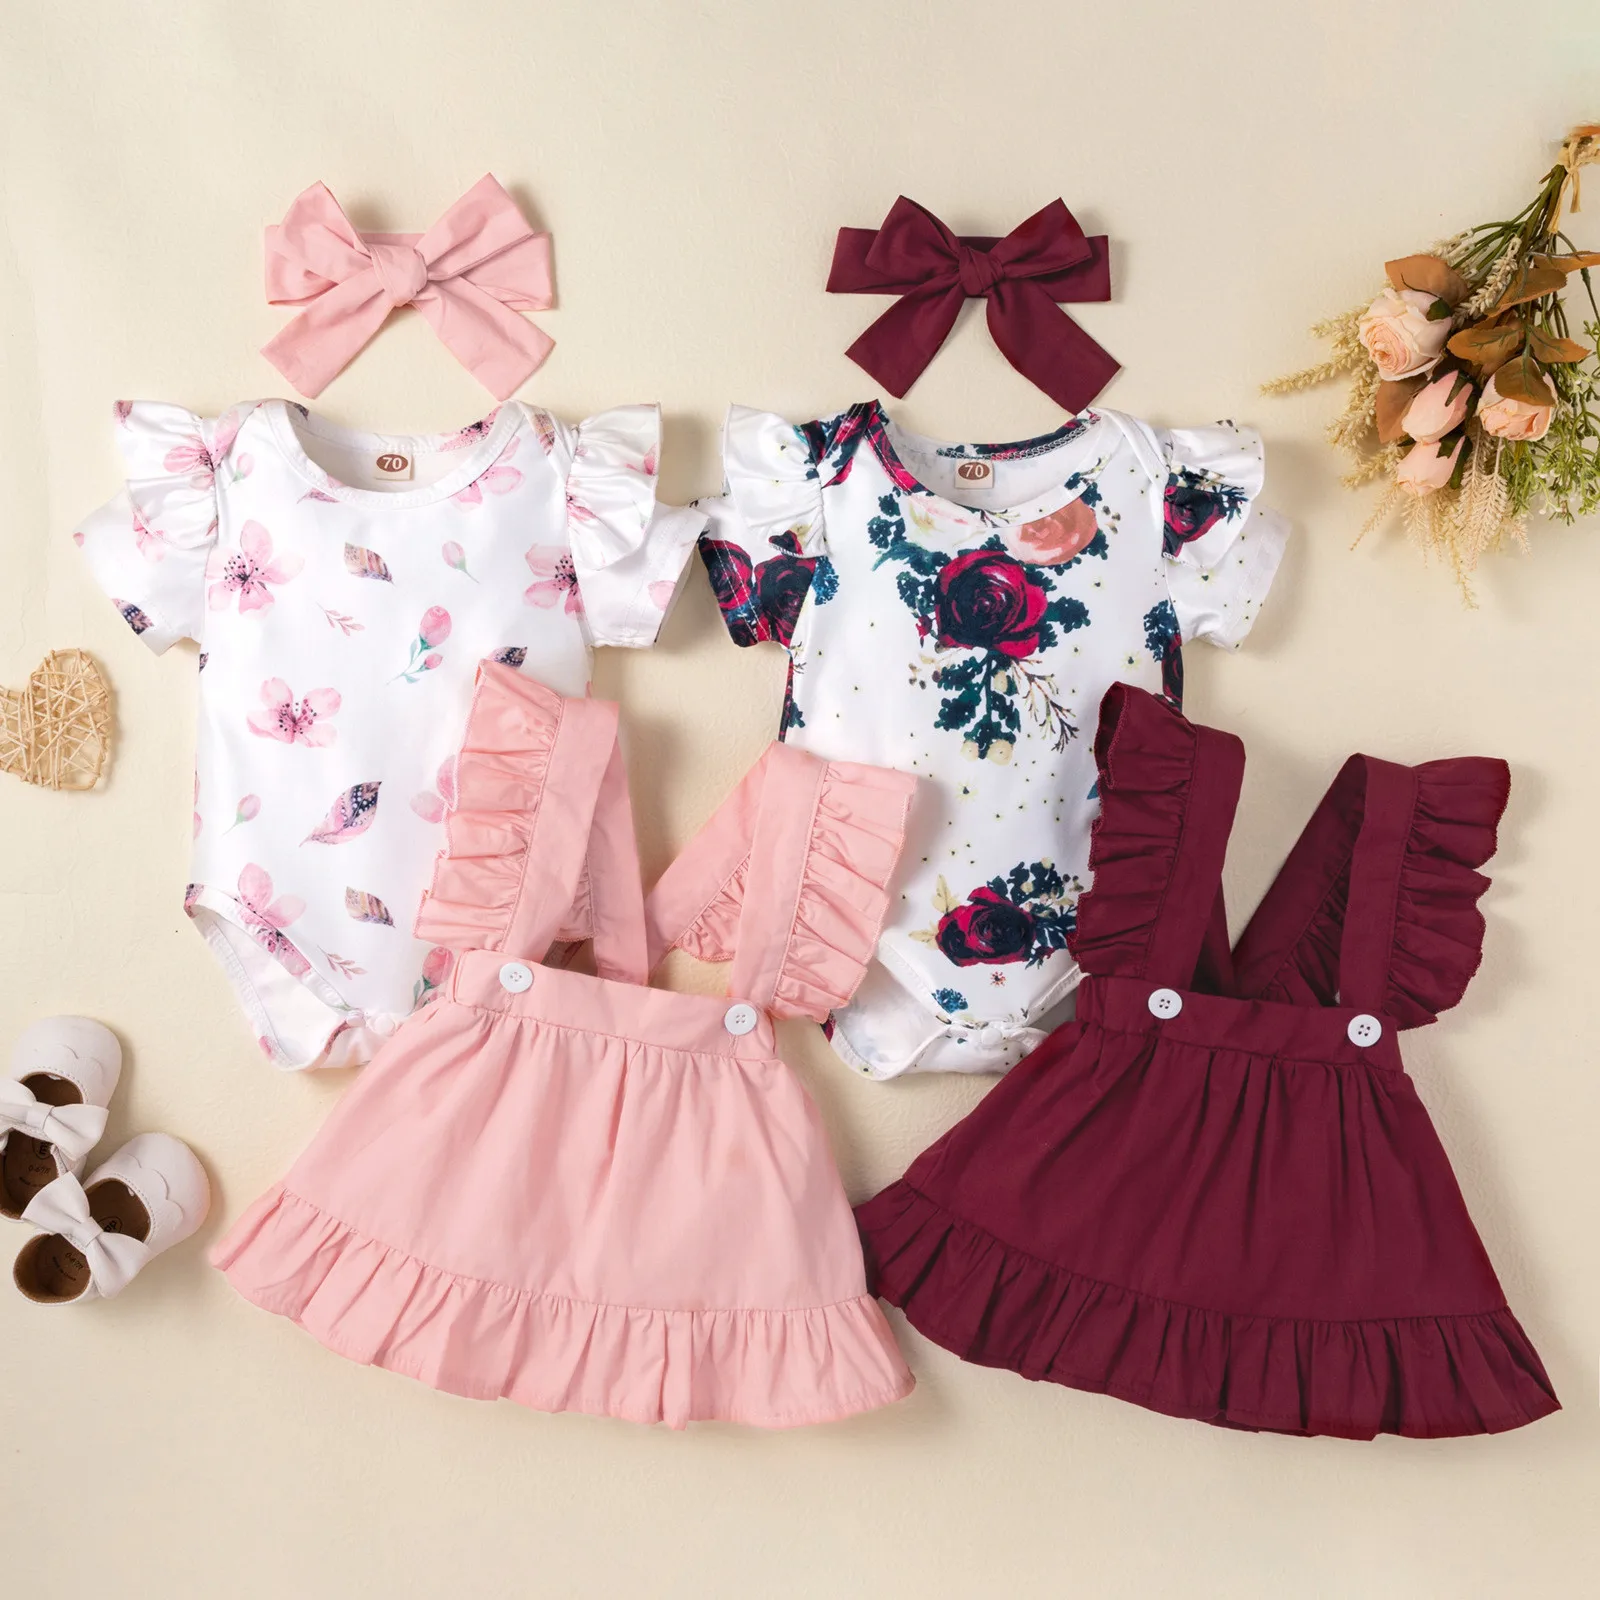 Girls Outfits Infant Baby Girls Sleeveless Ruffles Suspender Tops+Floral Print Shorts Outfits 0-18Months 